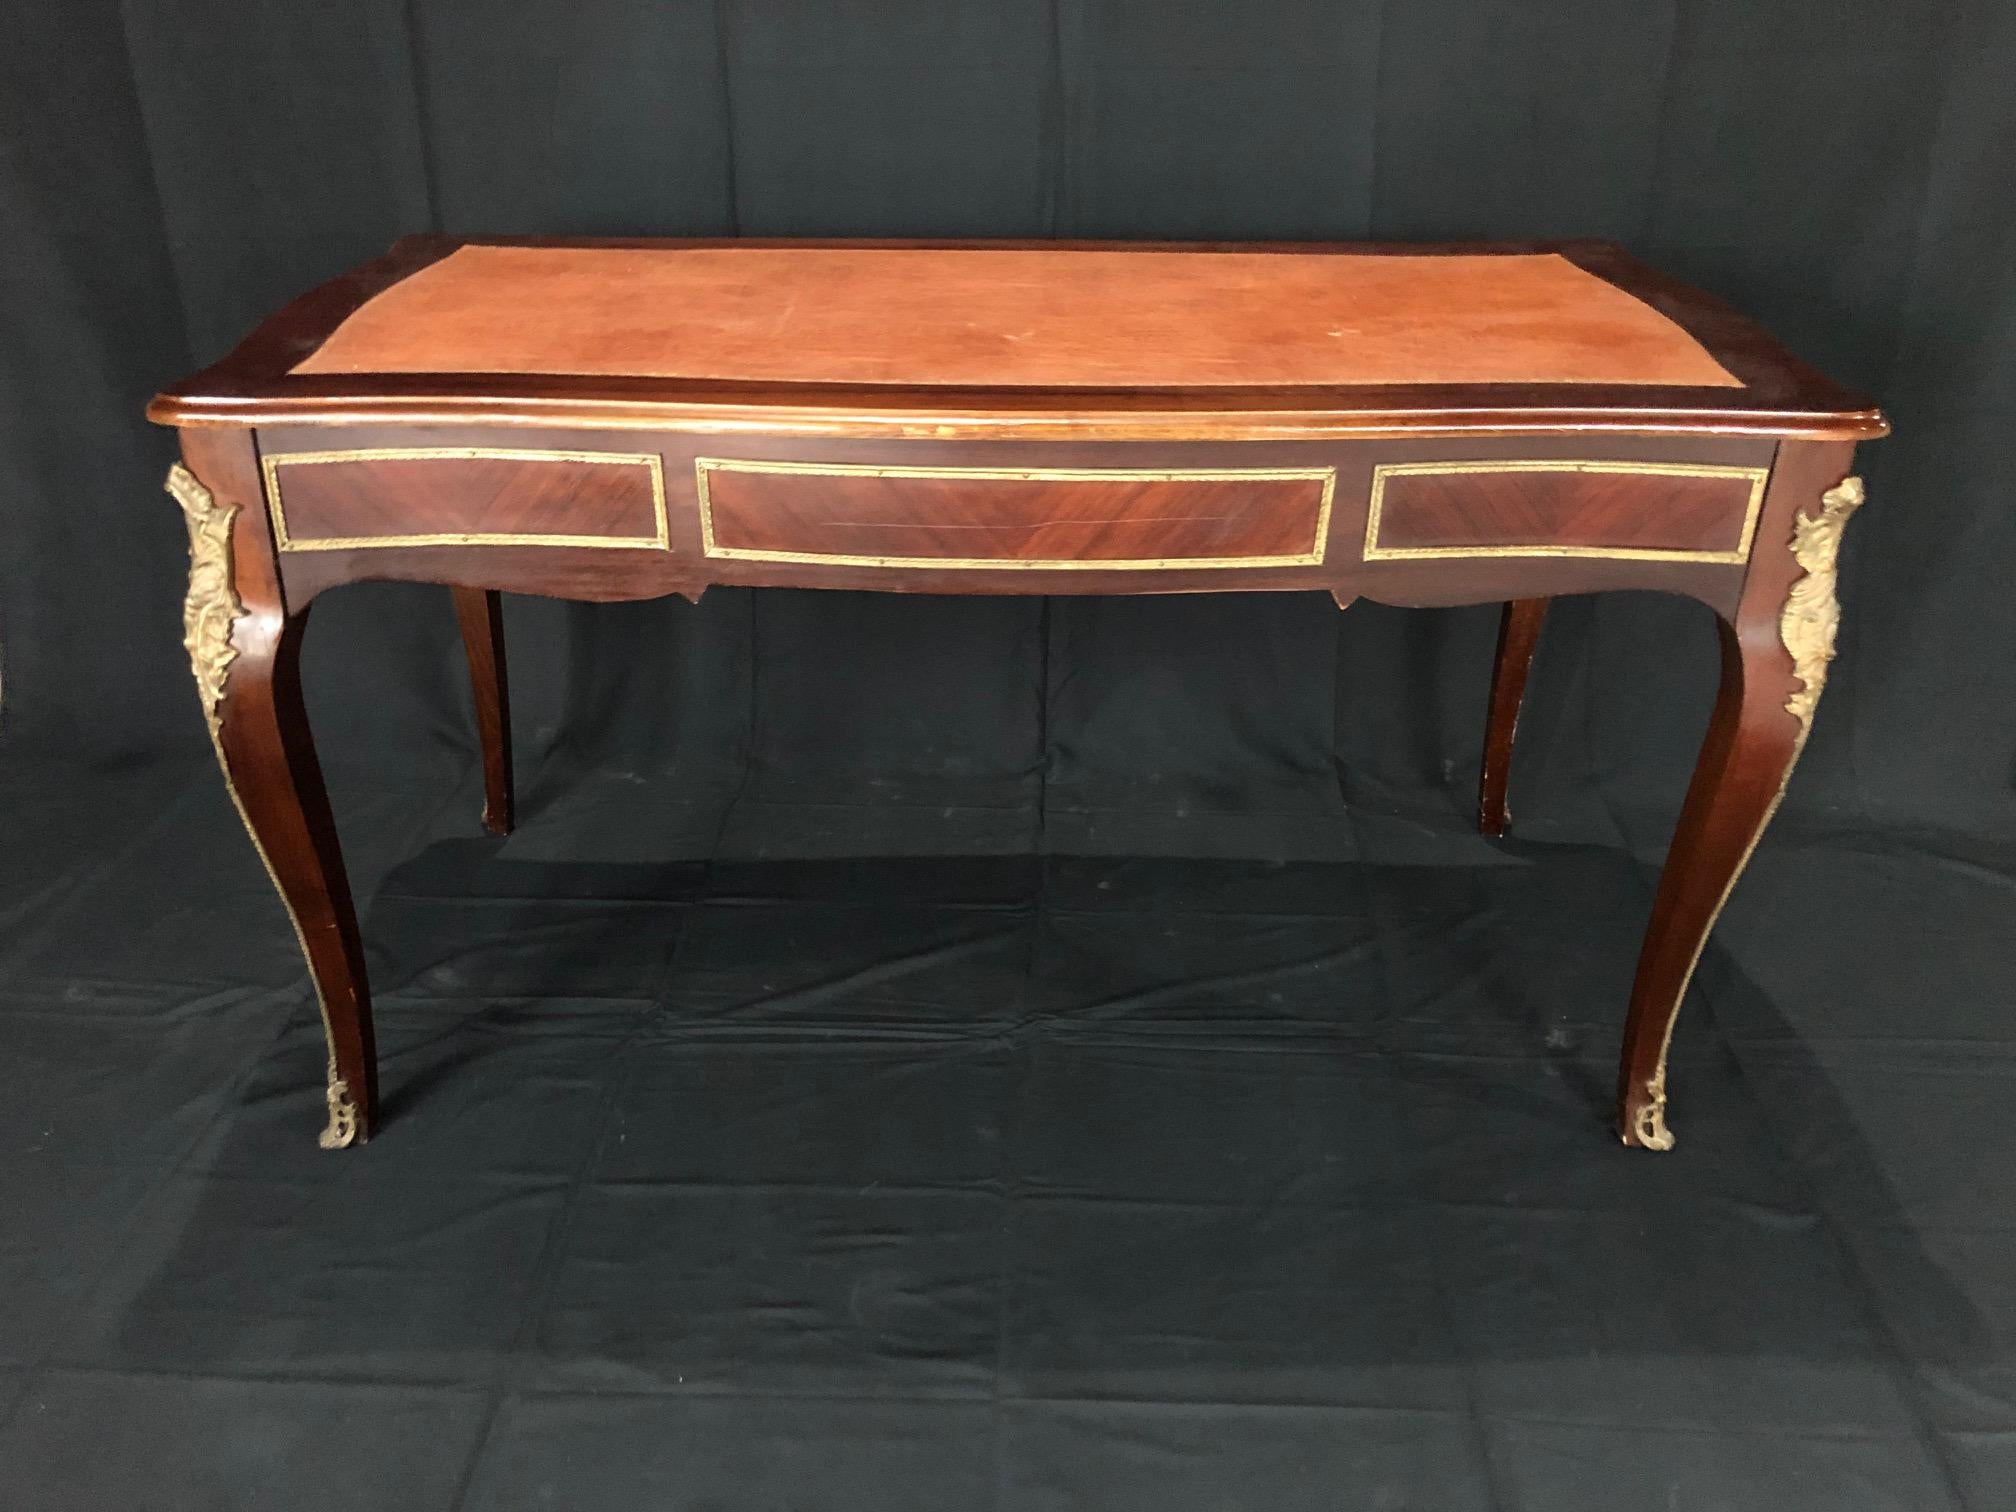 French Louis XV style walnut and ormolu bureau plat desk raised on elegant cabriole legs, dressed in ormolu wraparound sabot. The 3 drawers are decorated with gilt bronze handles, bronze detailing, and a central key hole escutcheon. The back is